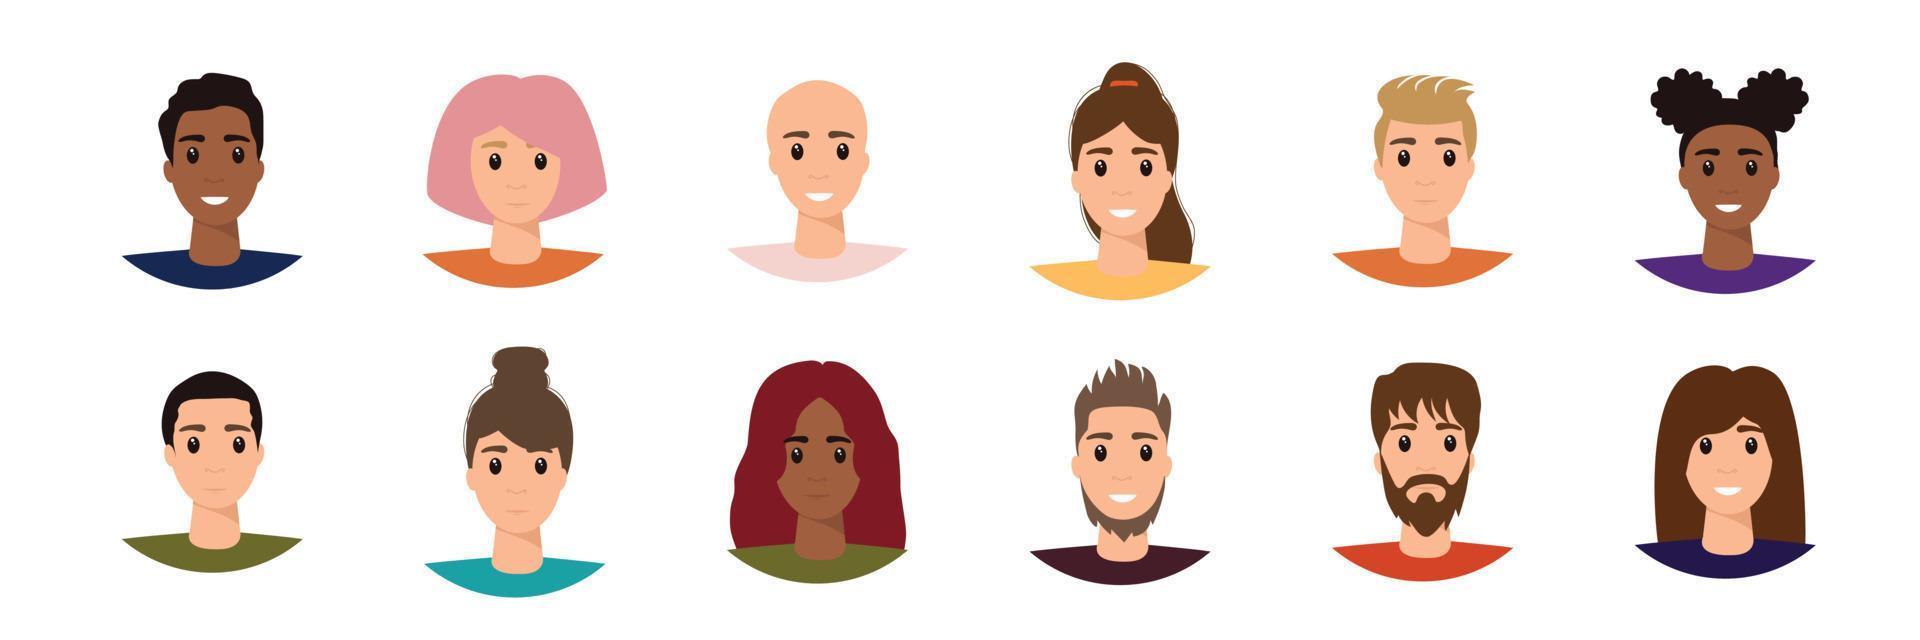 Set different person portrait of big diverse business team vector flat illustration. Collection of people avatars isolated. Bundle of joyful smiling colleagues. Man and woman faces at round frame